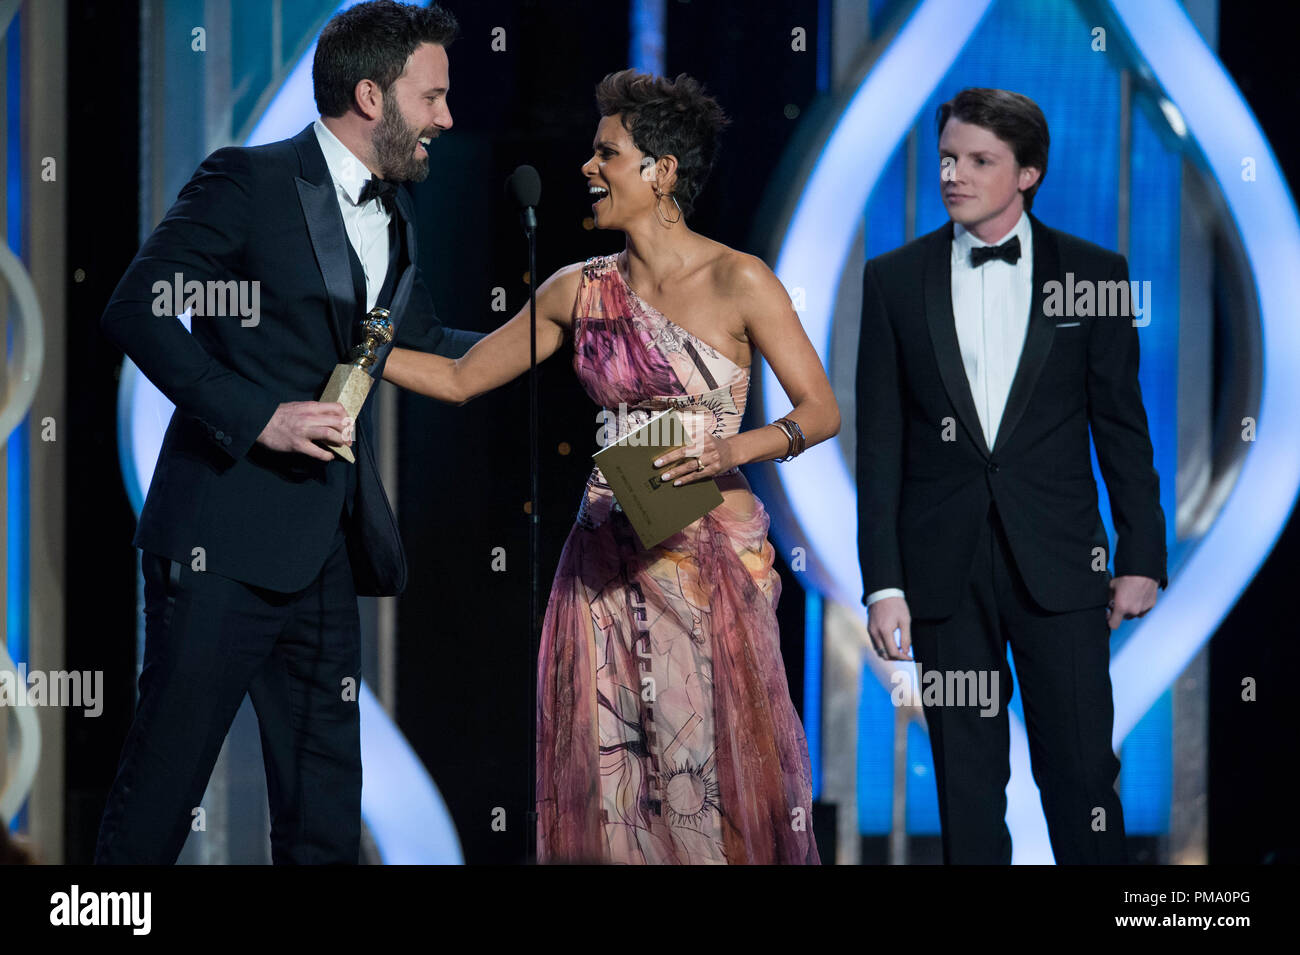 The Golden Globe is awarded to Ben Affleck for BEST DIRECTOR – MOTION PICTURE for “ARGO” from actress Halle Berry at the 70th Annual Golden Globe Awards at the Beverly Hilton in Beverly Hills, CA on Sunday, January 13, 2013. Stock Photo